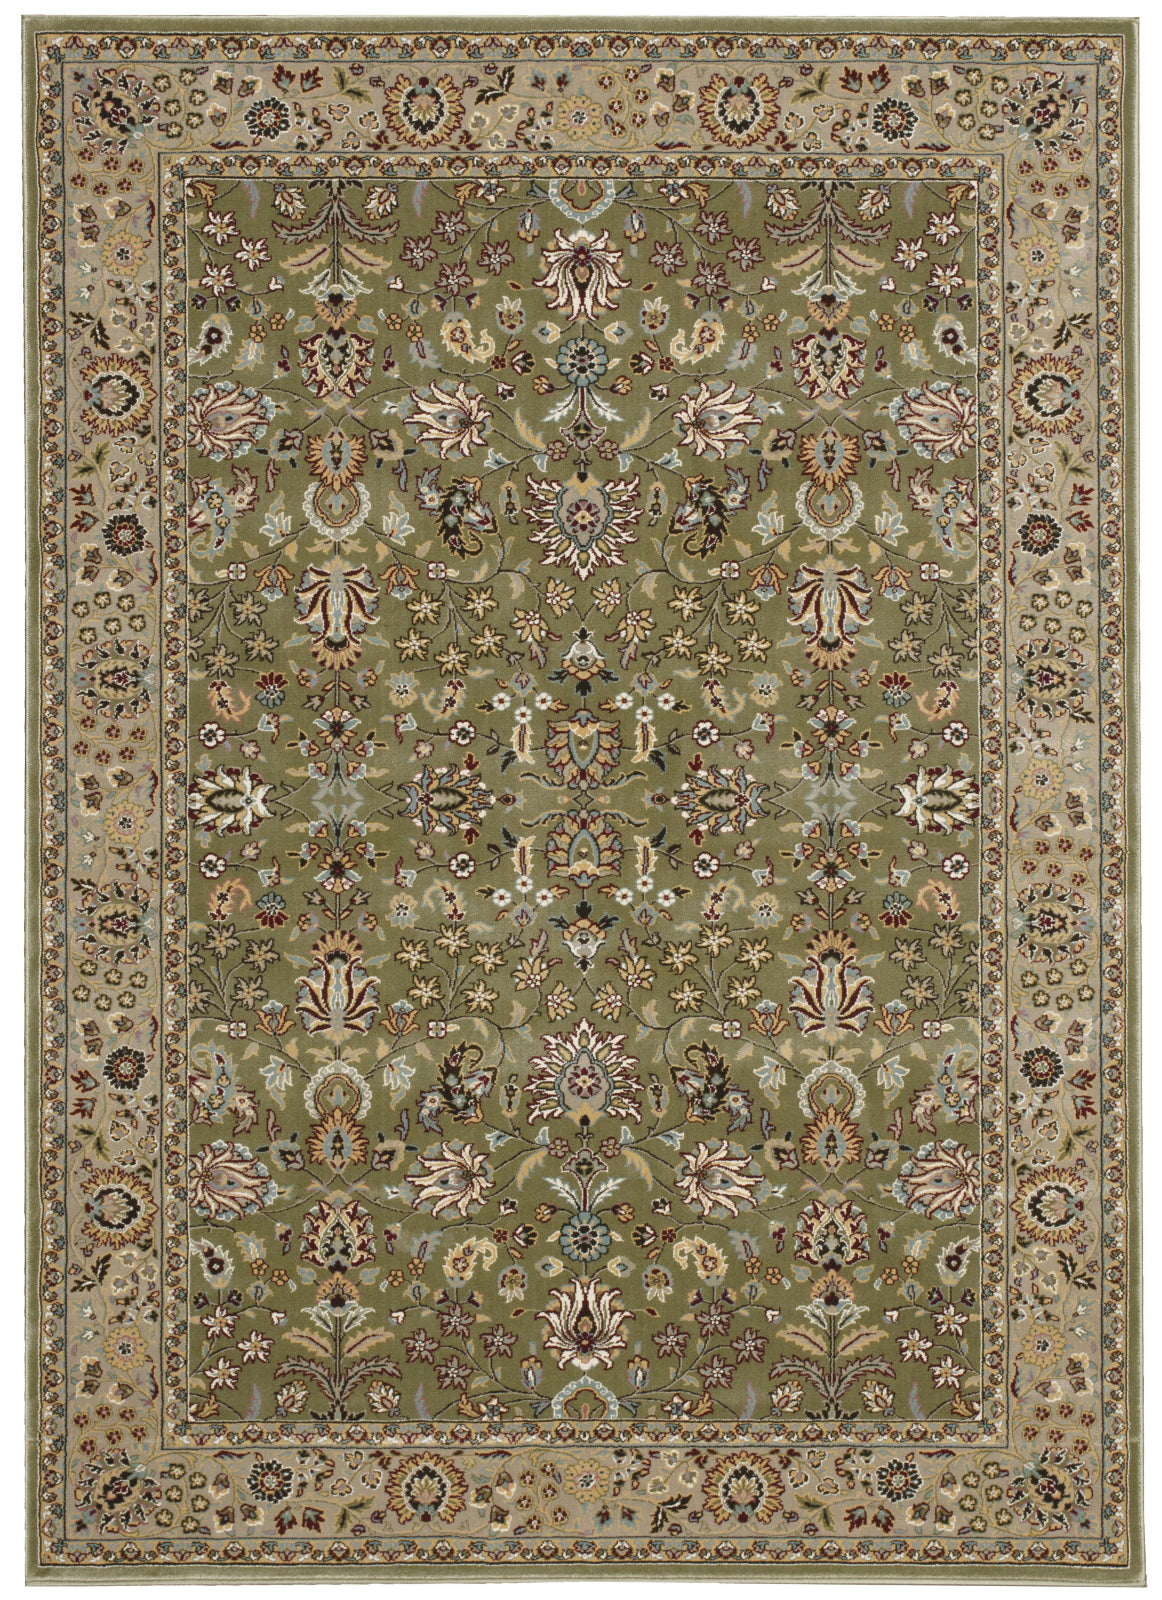 Nourison Antiquities ANT04 Royal Countryside Sage Area Rug by Kathy Ireland main image